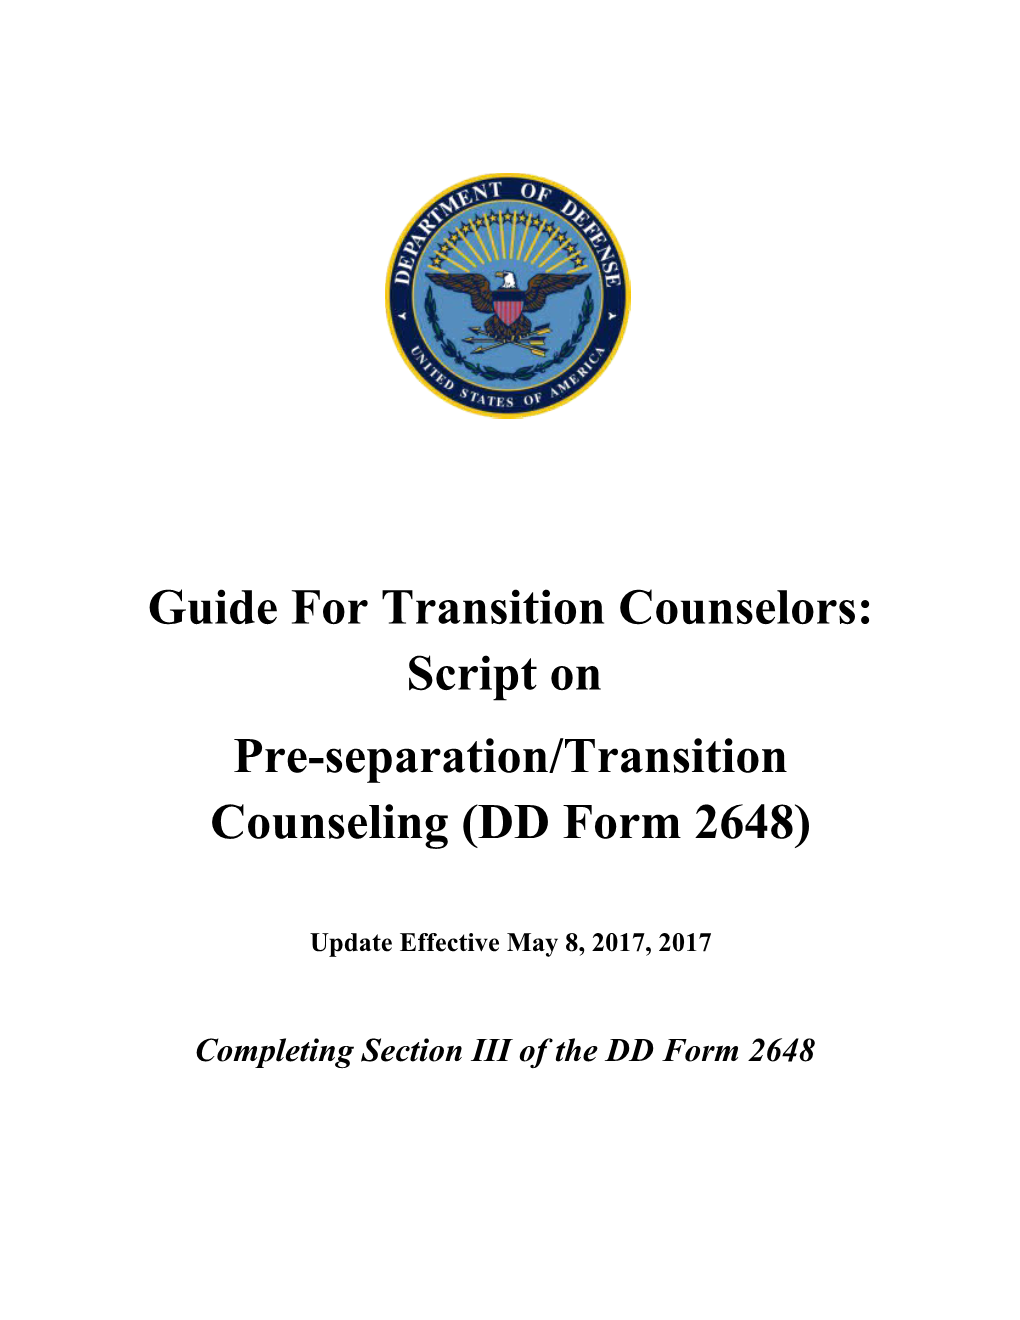 Guide for Transition Counselors:Script On